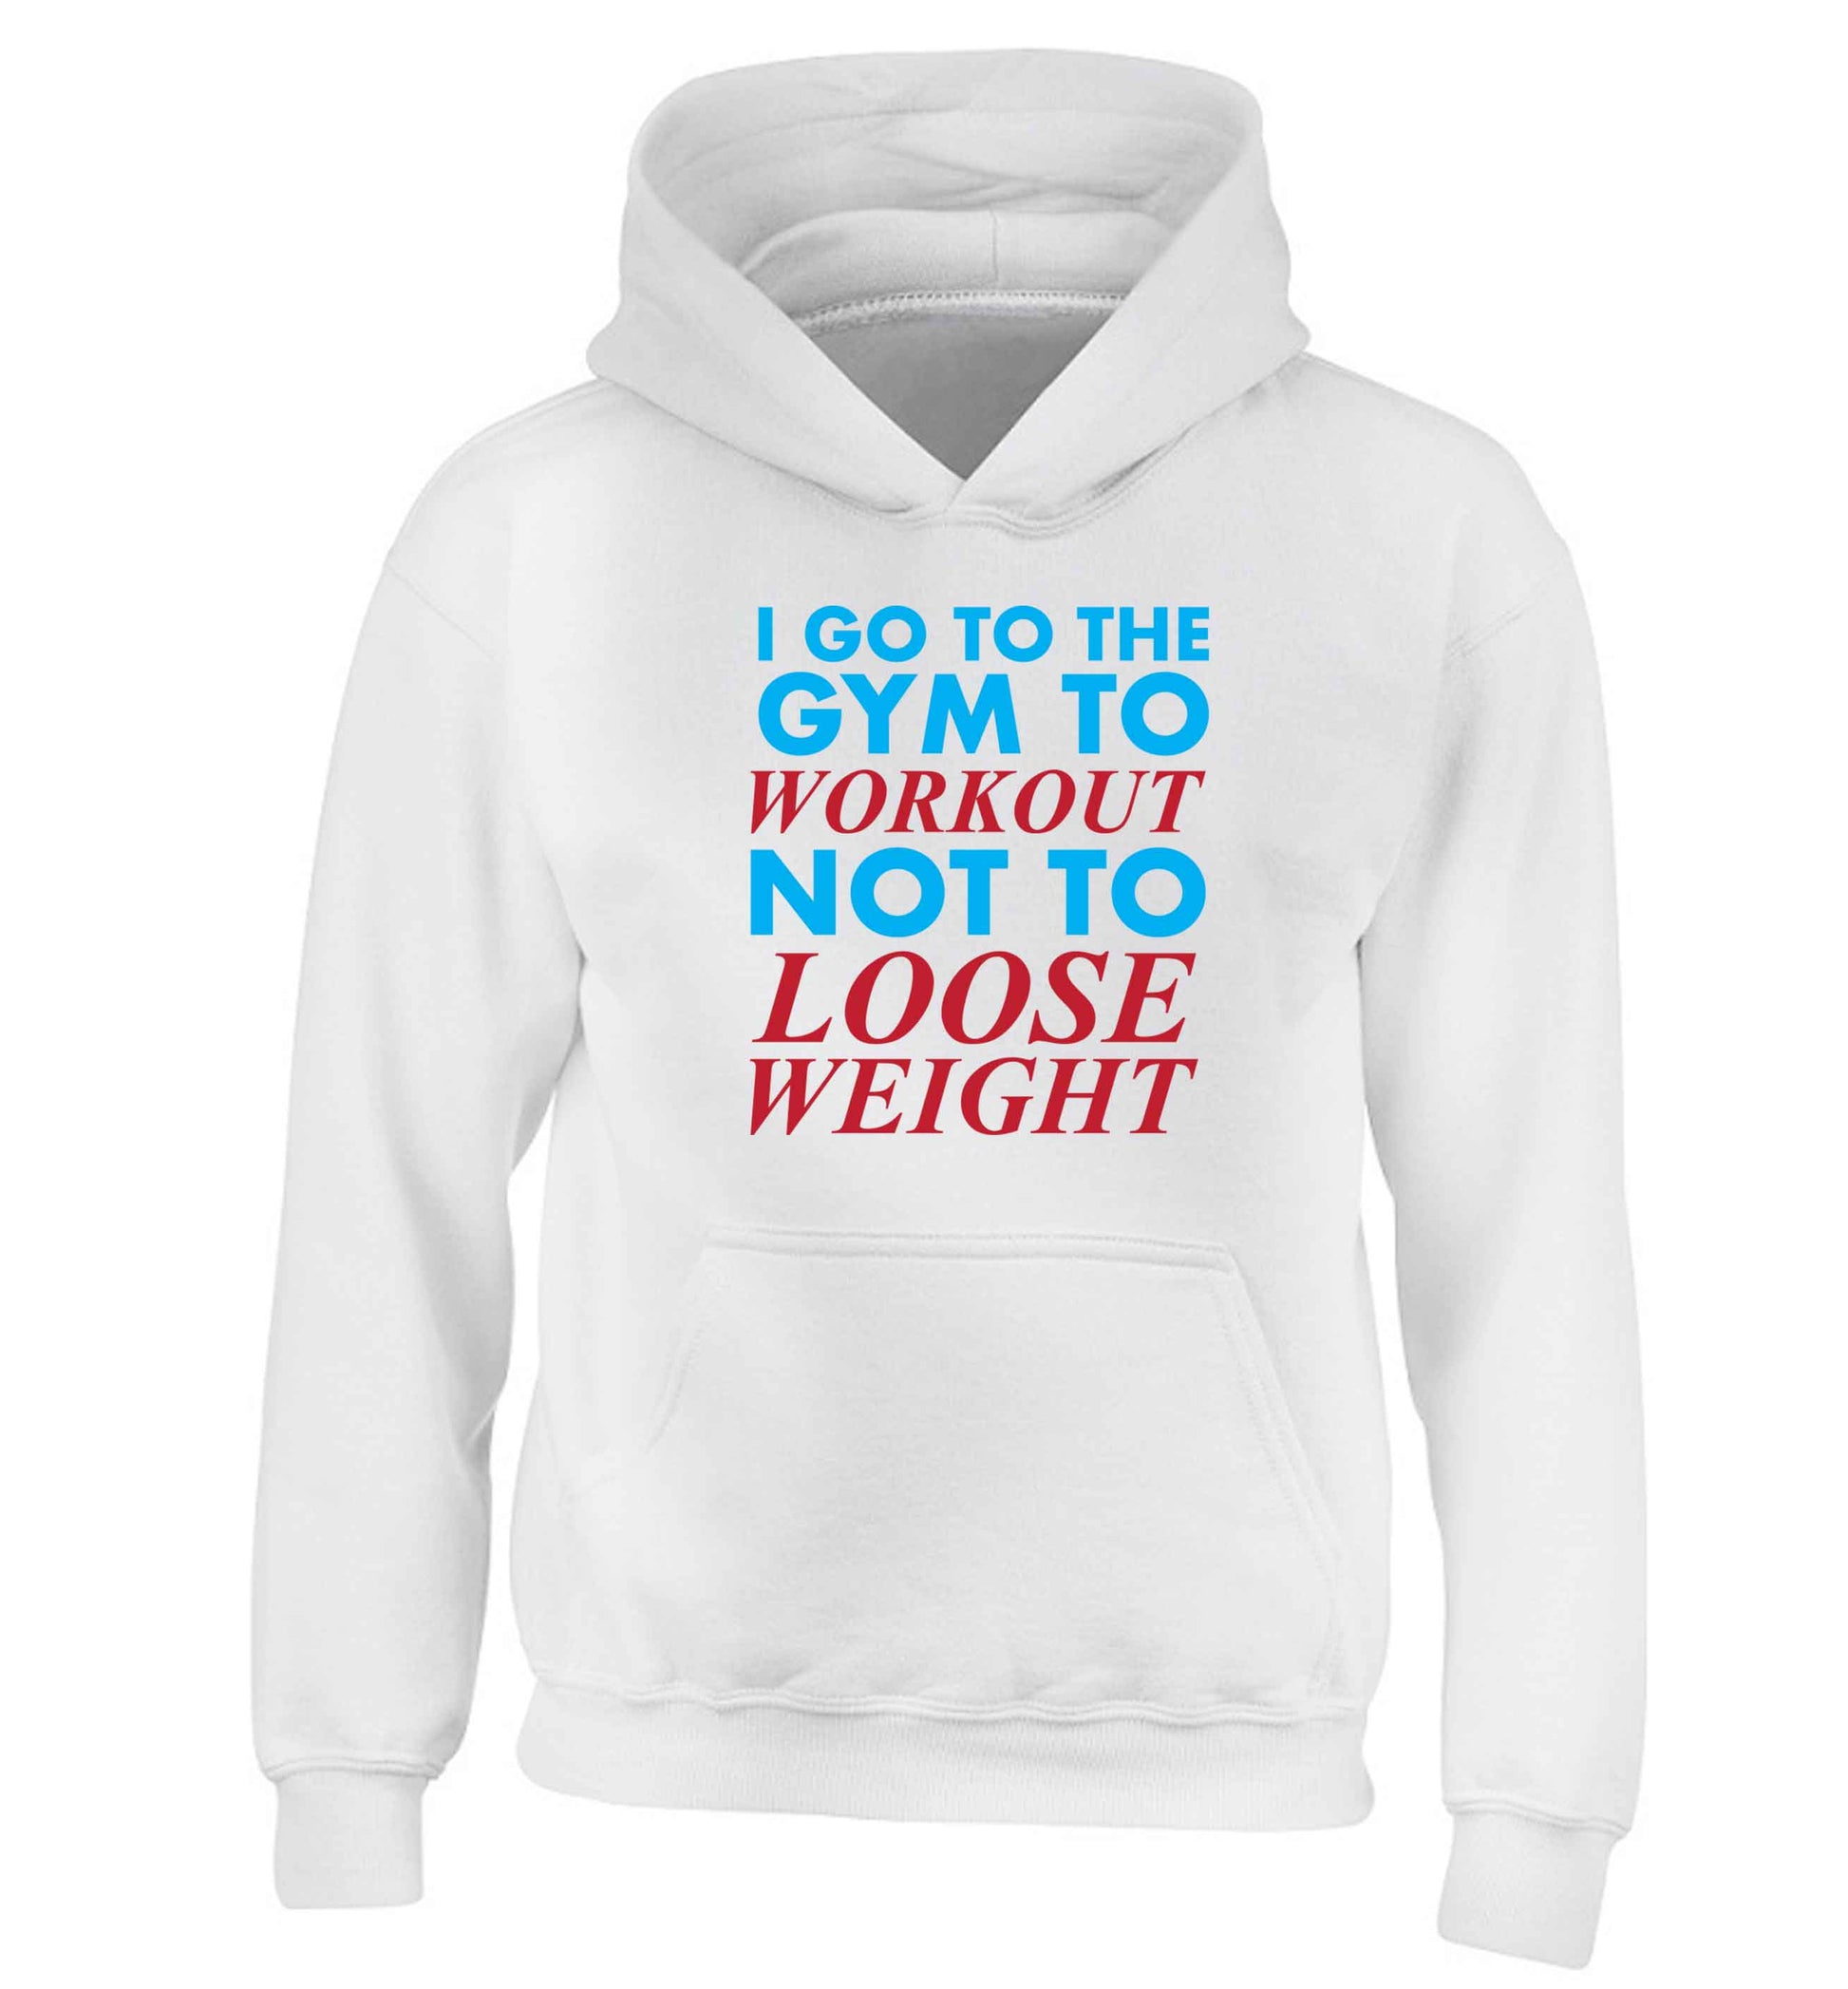 I go to the gym to workout not to loose weight children's white hoodie 12-13 Years